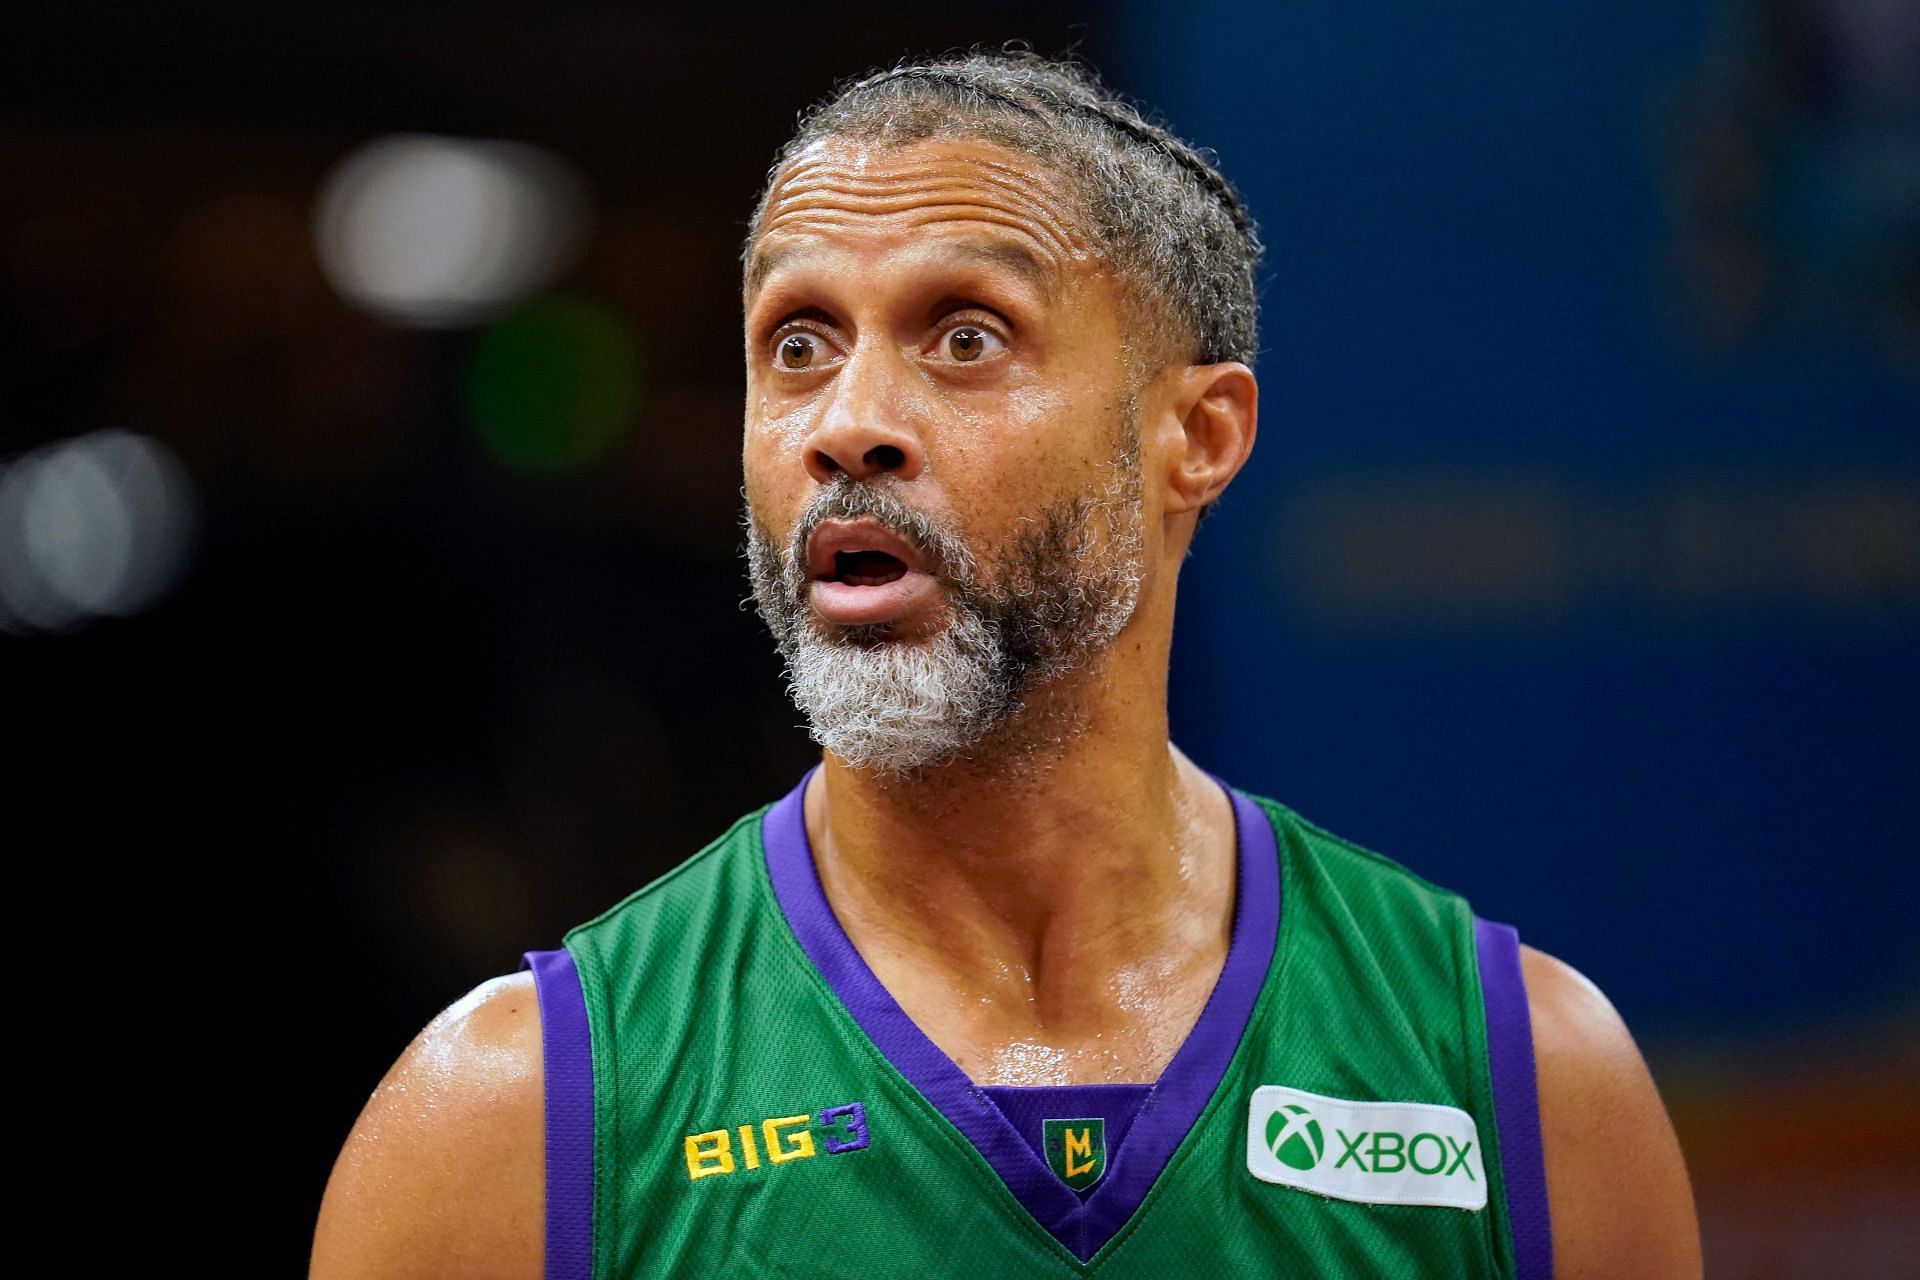 Ex-NBA star Mahmoud Abdul-Rauf 'Could Care Less' About Getting An Apology  From NBA